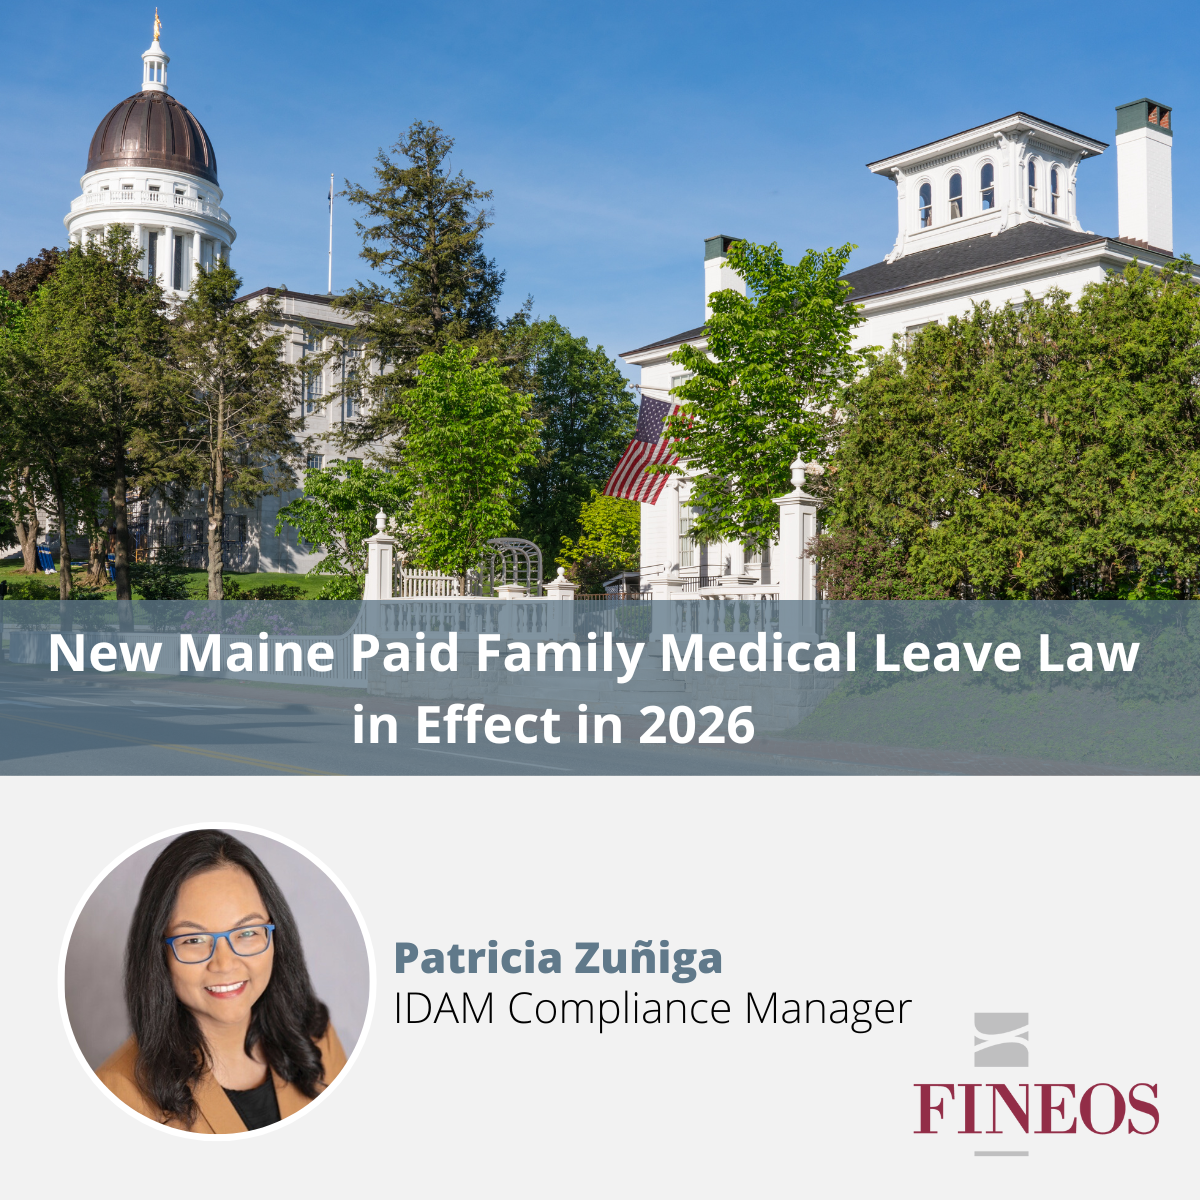 New Maine Paid Family Medical Leave Law in Effect in 2026 - pic pic